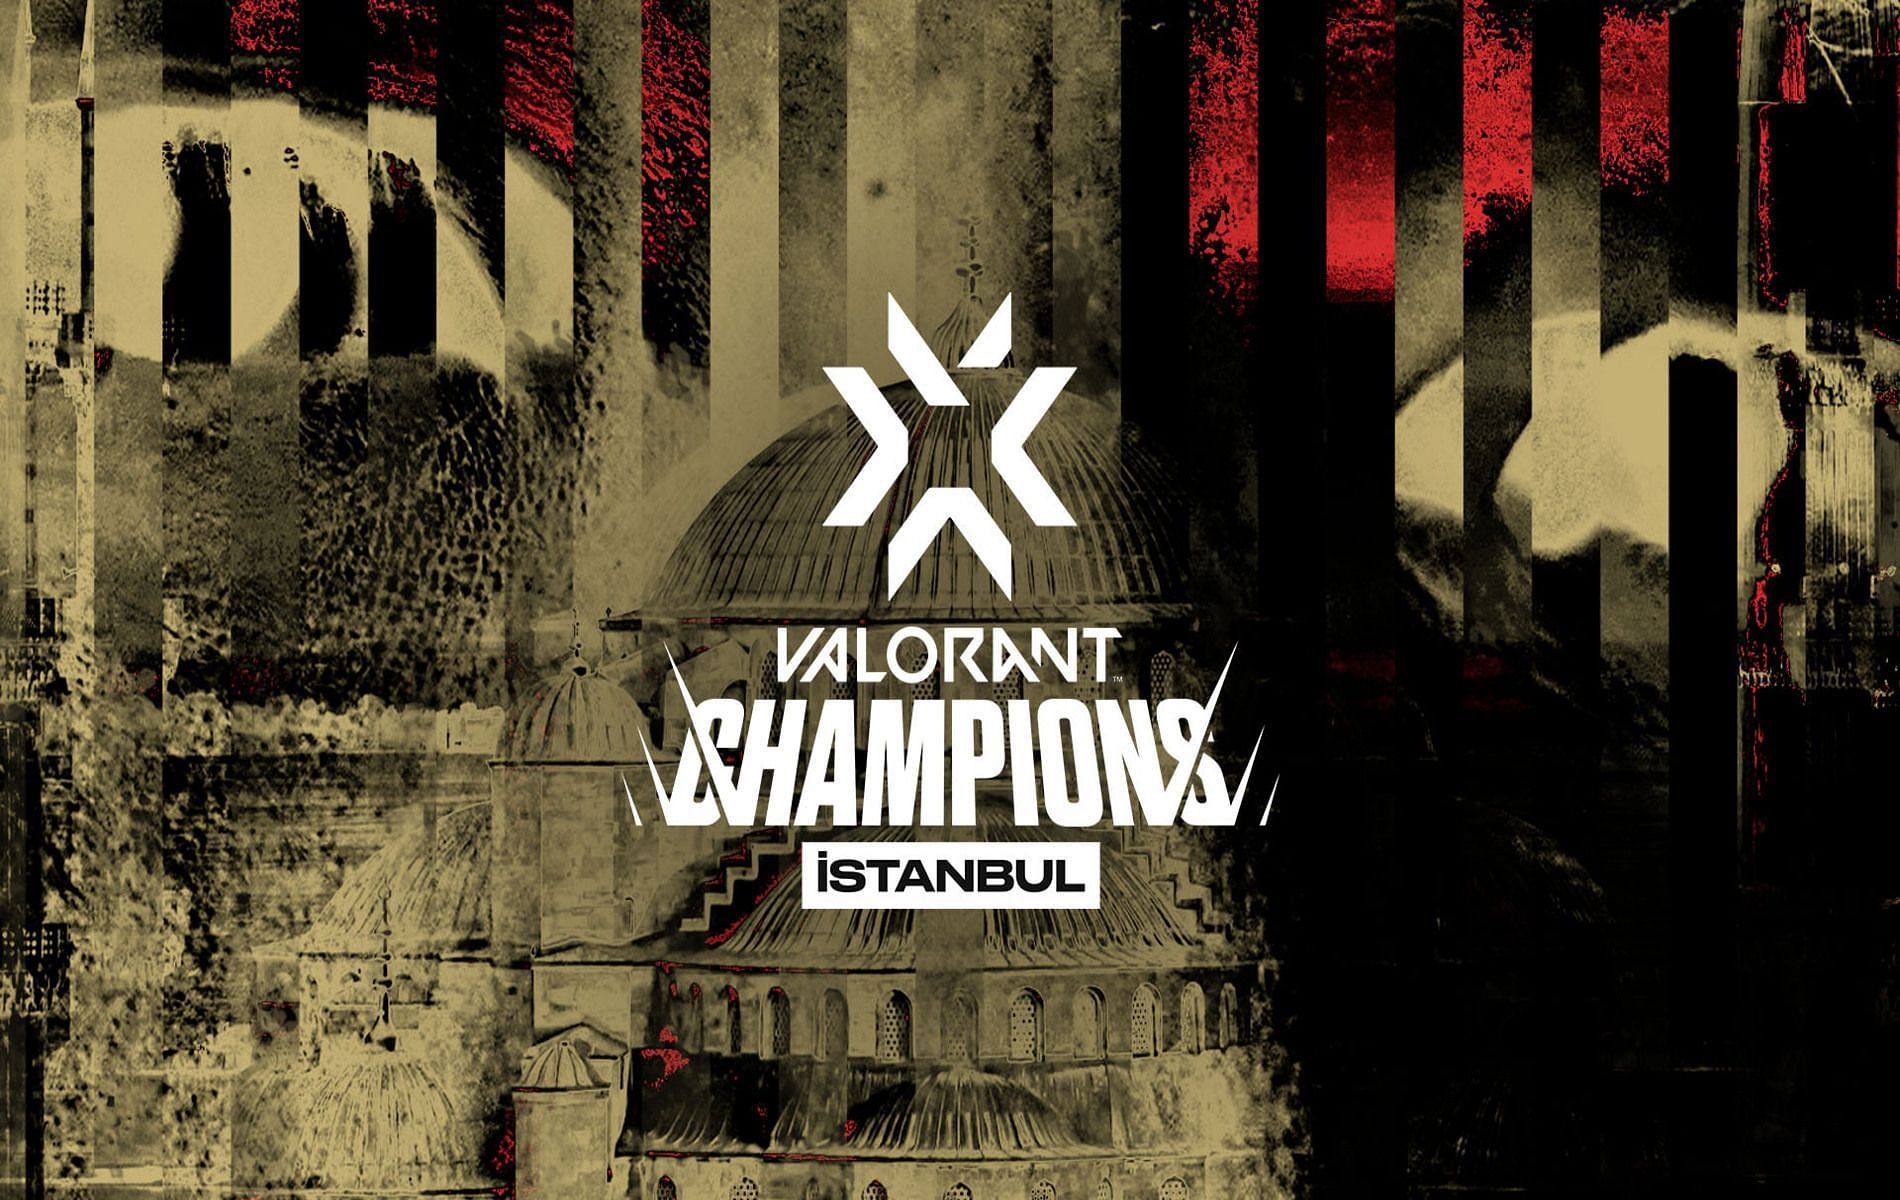 All known details regarding the upcoming Valorant Champions 2022 (Image via Riot Games)